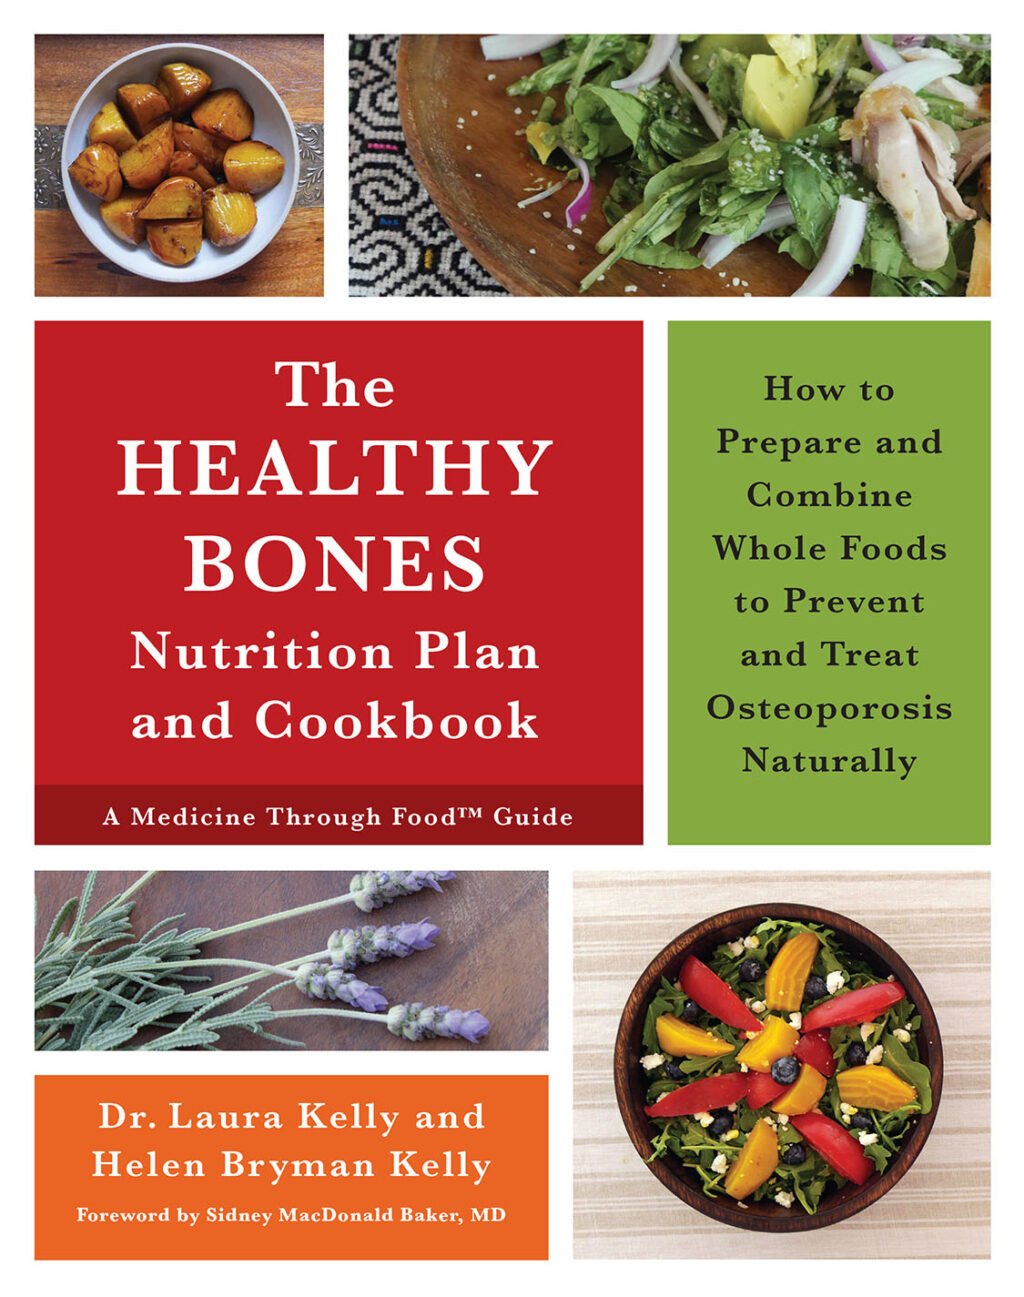 The Healthy Bones Nutrition Plan and Cookbook cover